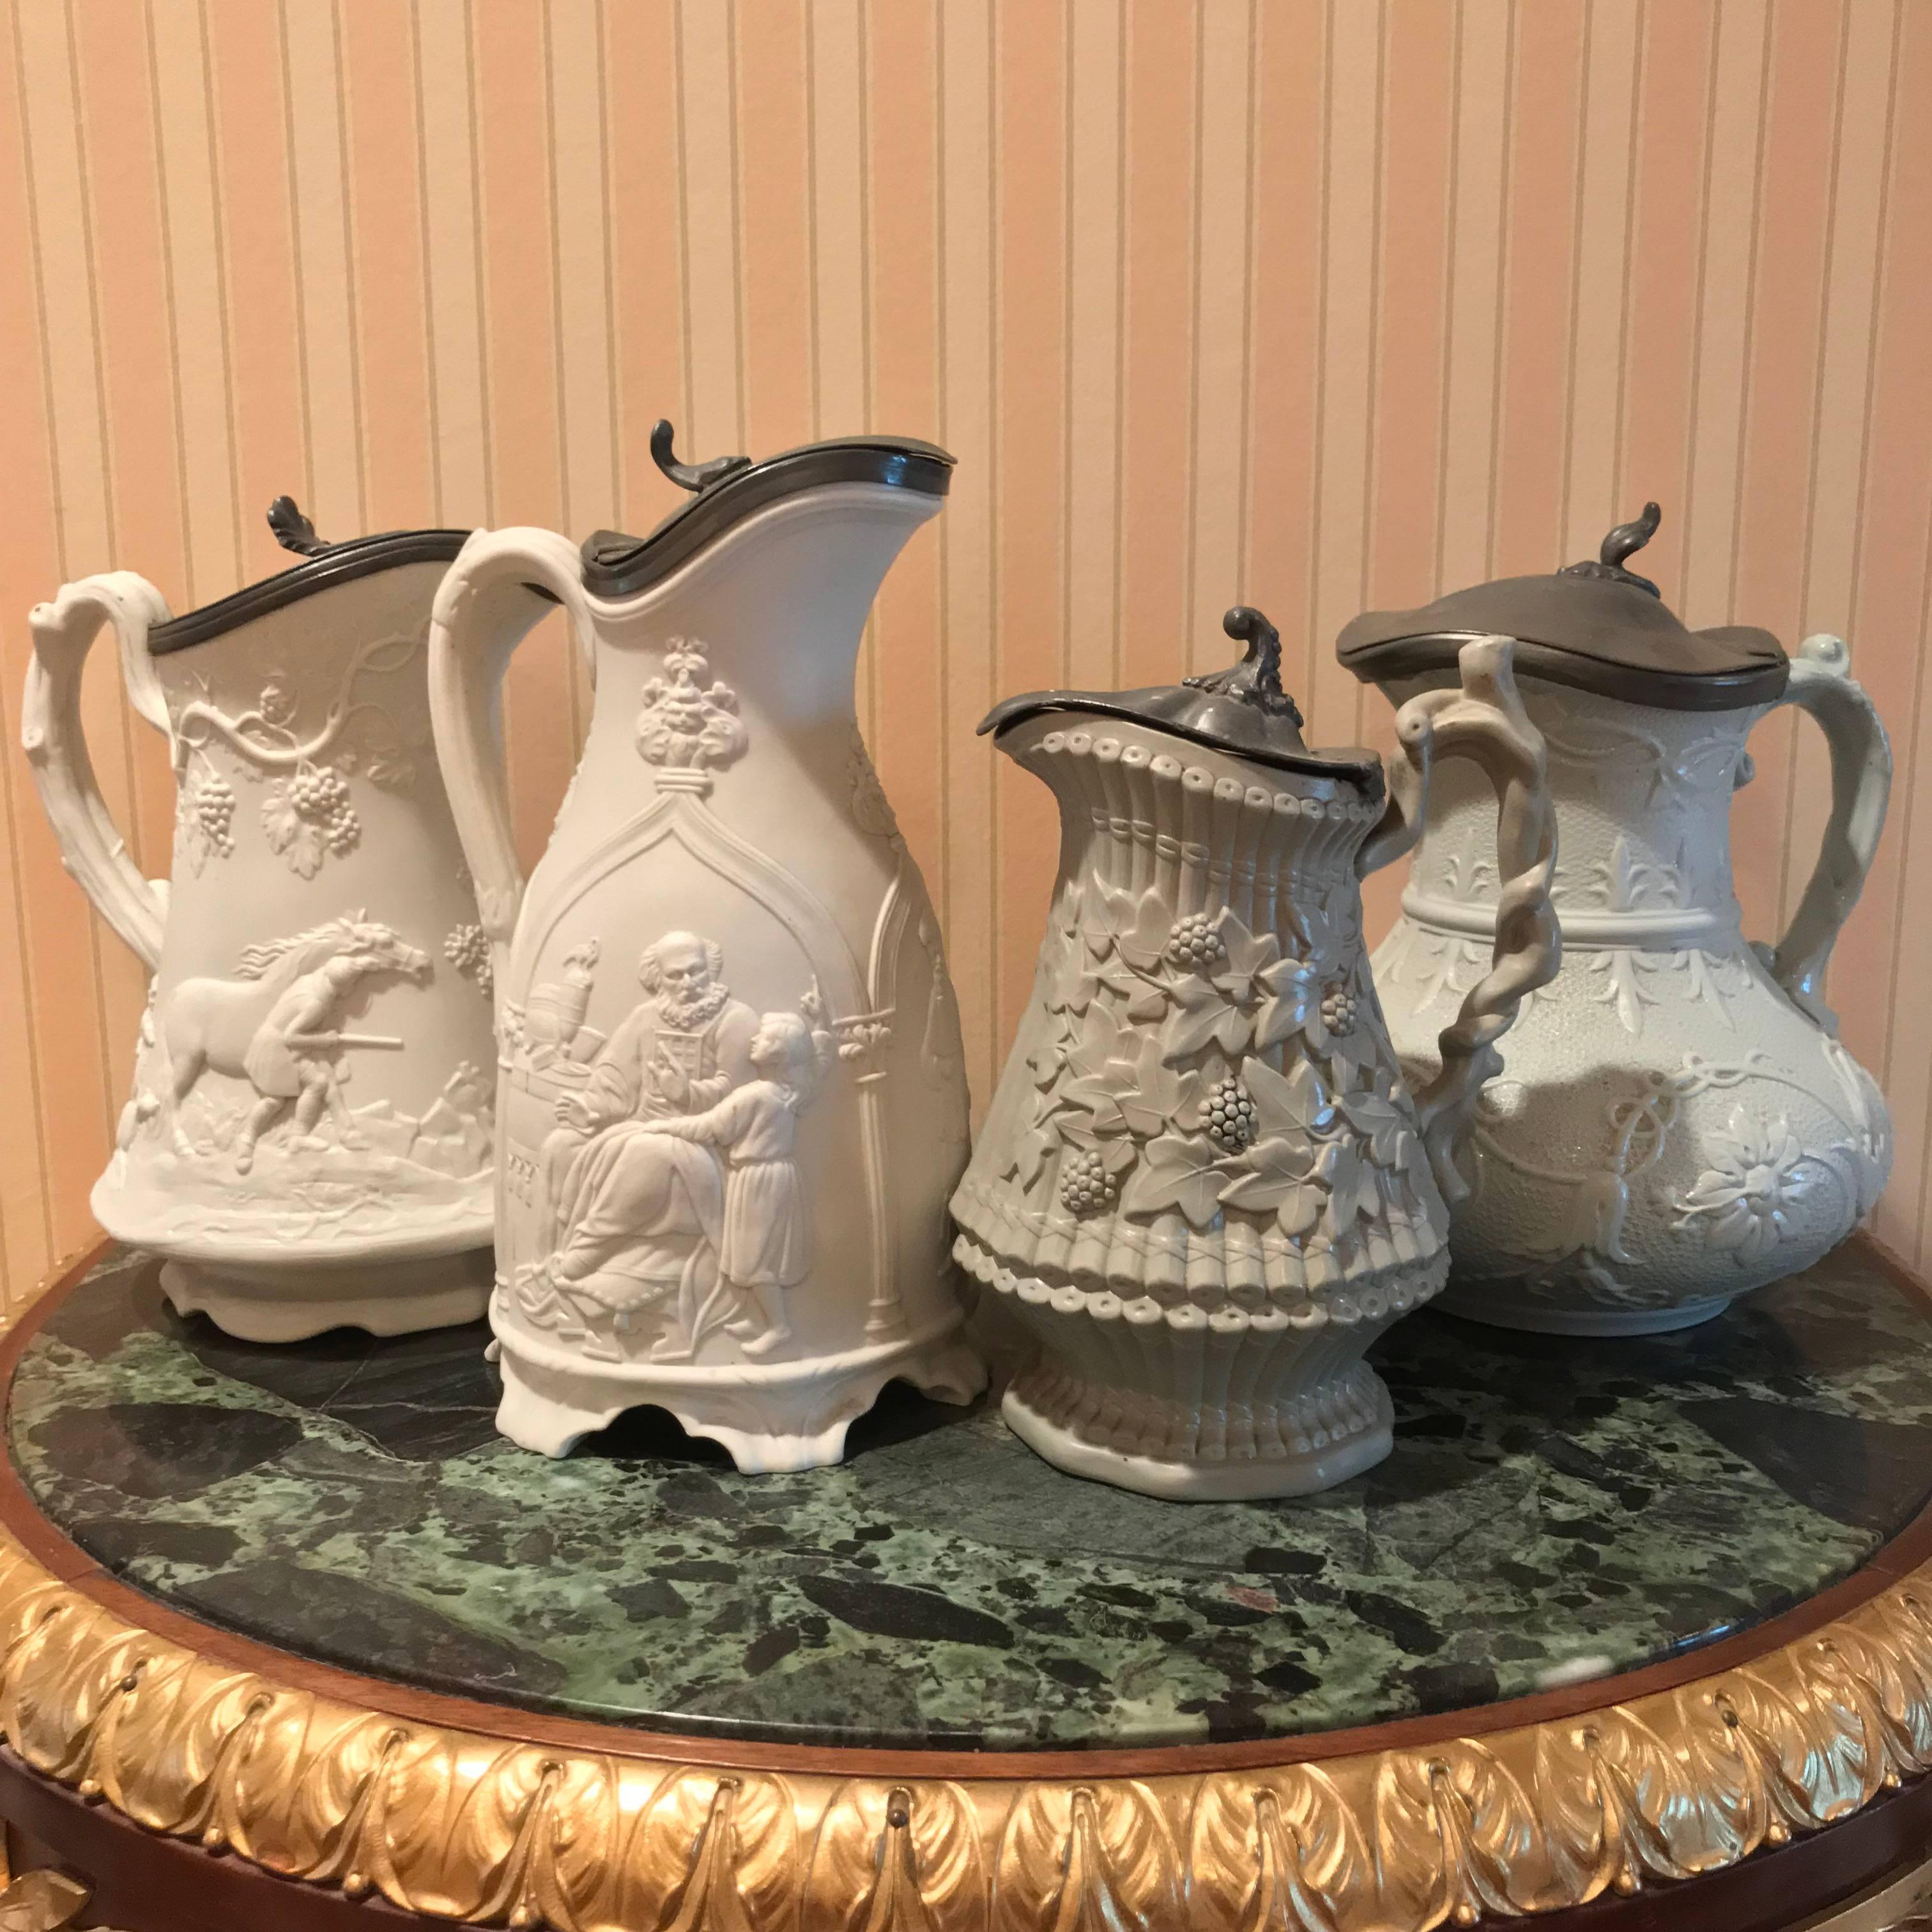 Lot of four Pewter flip top relief pitchers, all decorated with hunting/floral scenes. Measures: 1) 8